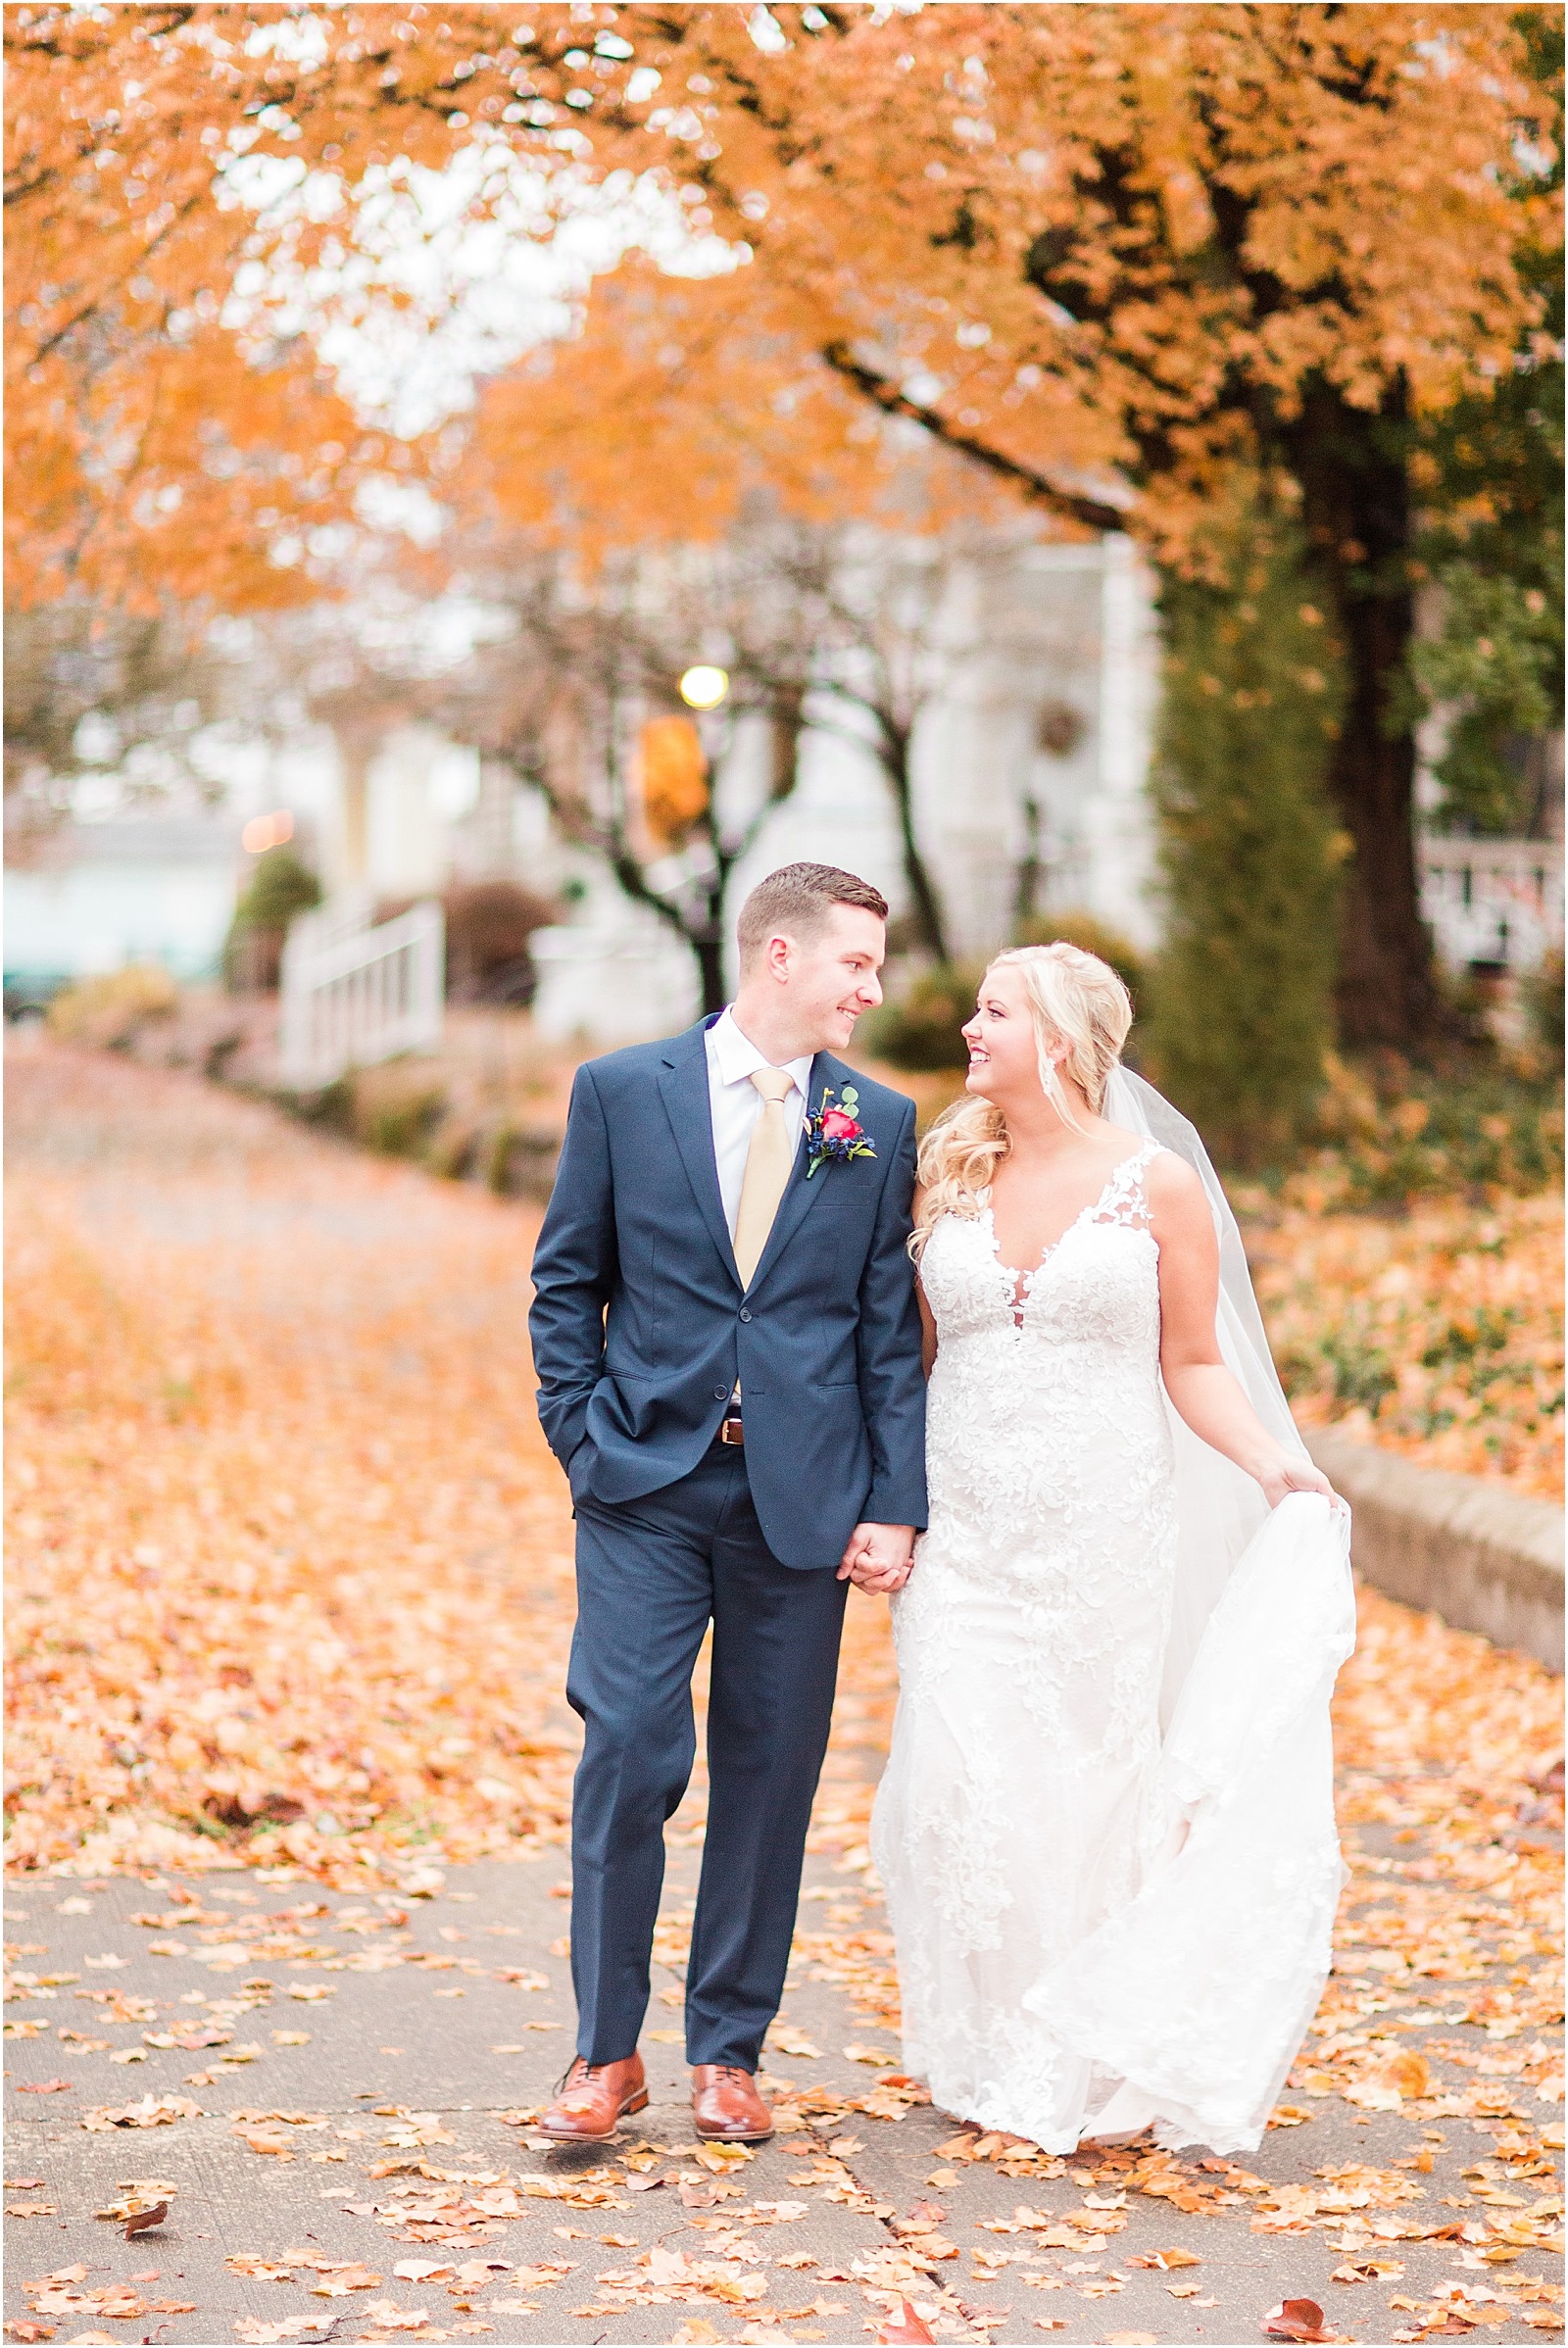 Haylee and Dillon's Evansville, Indiana wedding by Bret and Brandie Photography.0078.jpg